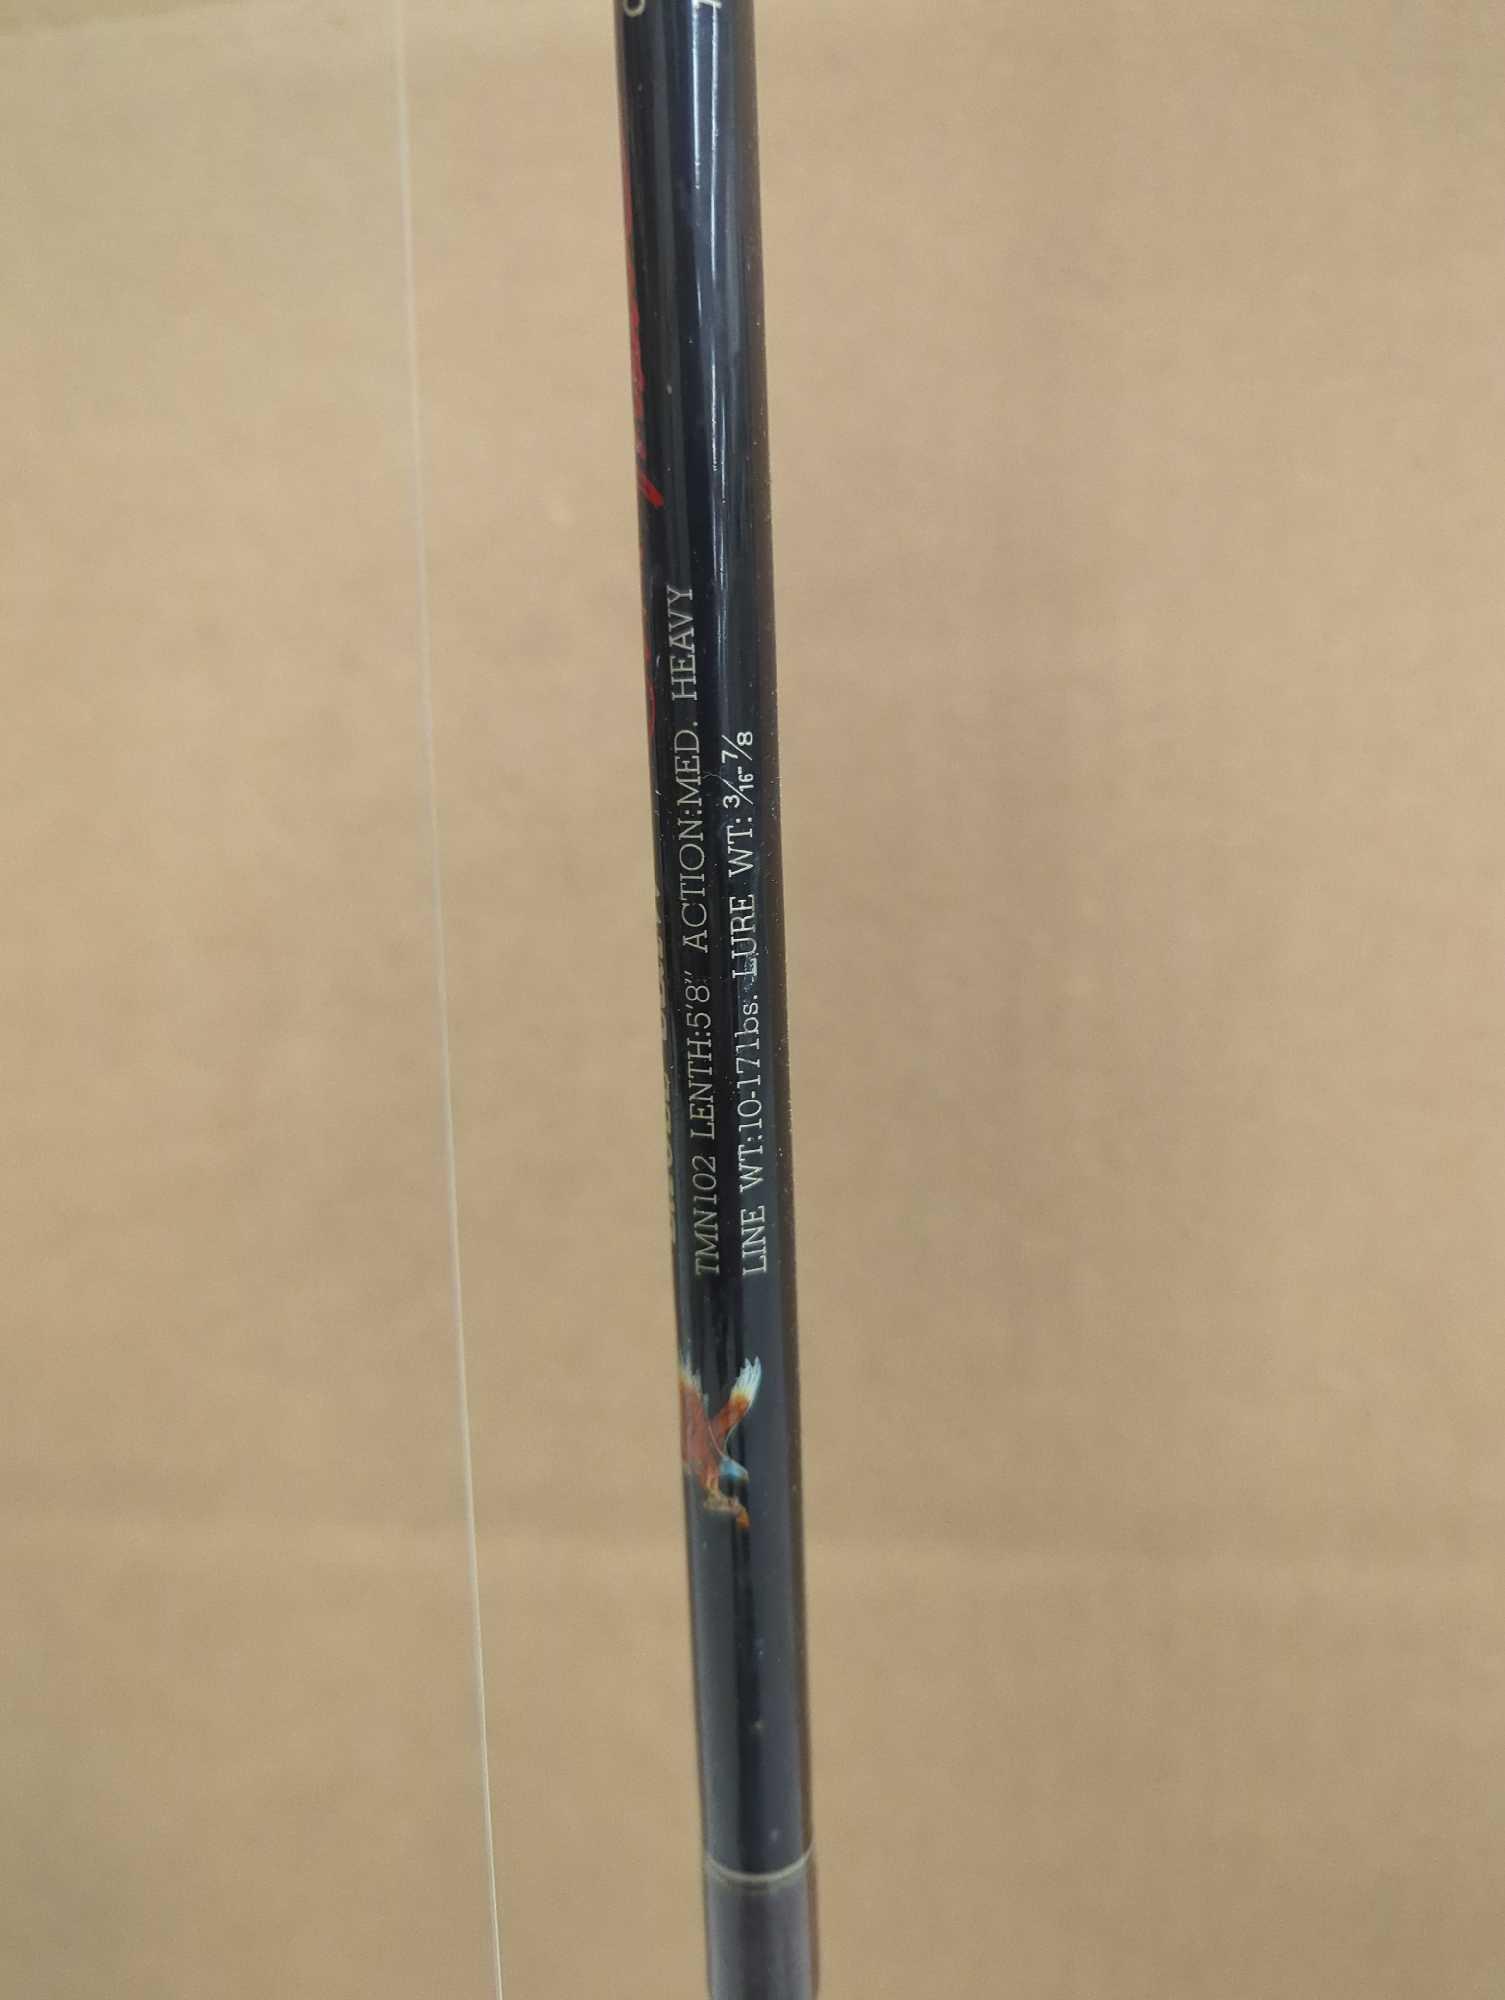 Eagle Claw Tom Mann Graphite Model # TMN102 Medium heavy action Line weight 10-17lbs Lure weight